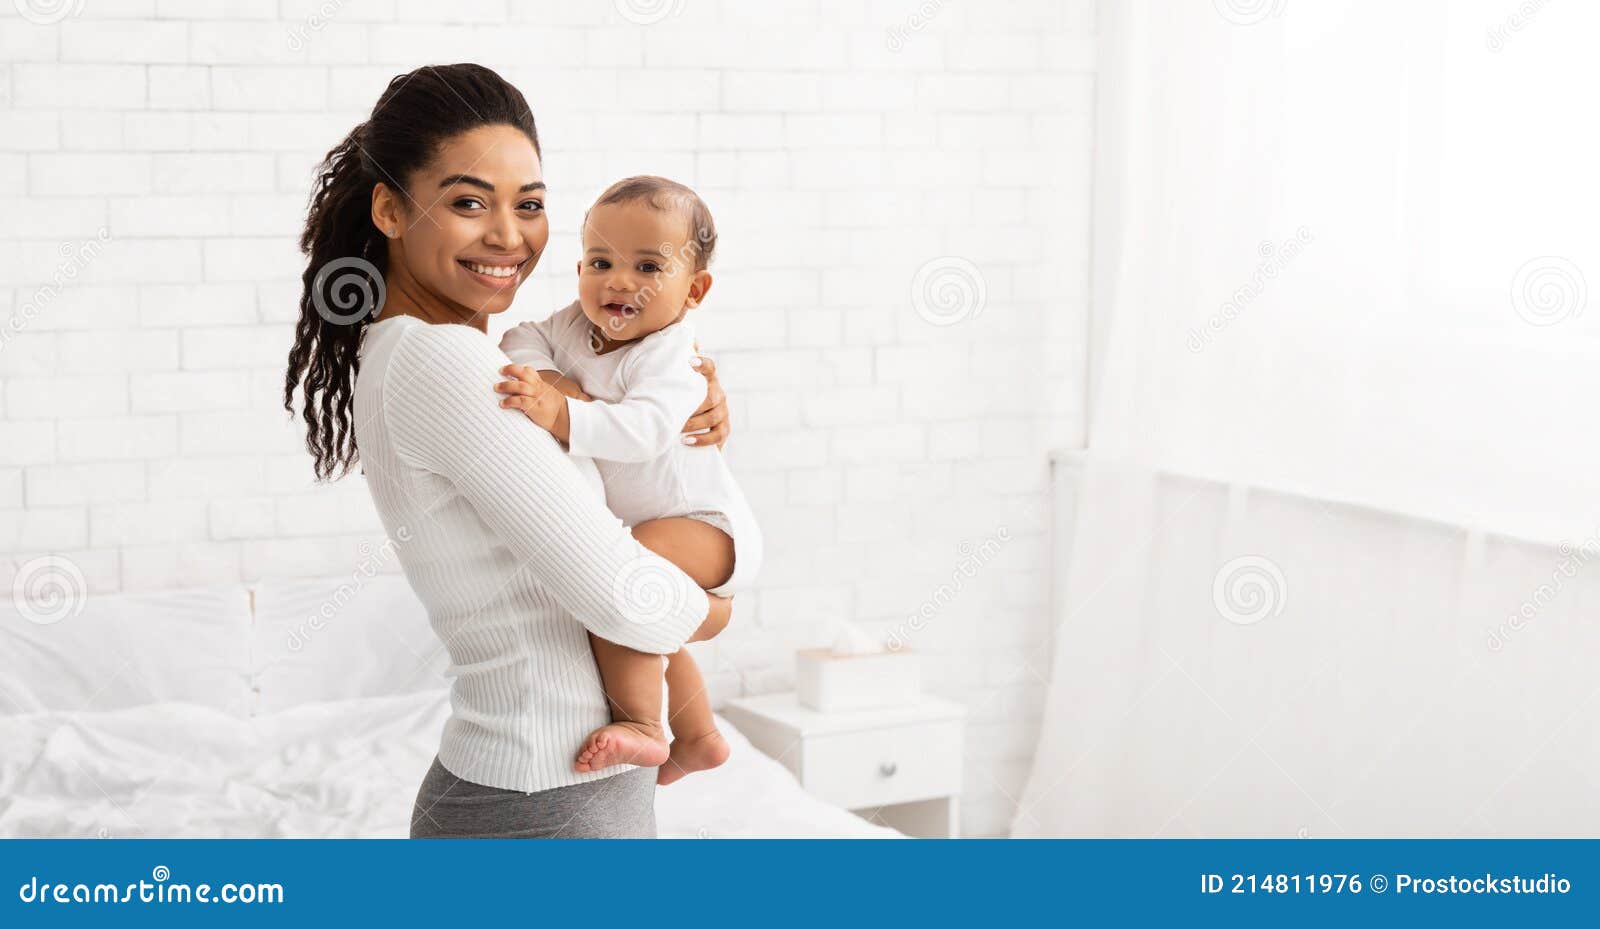 young black mom holding baby toddler posing standing indoors, panorama